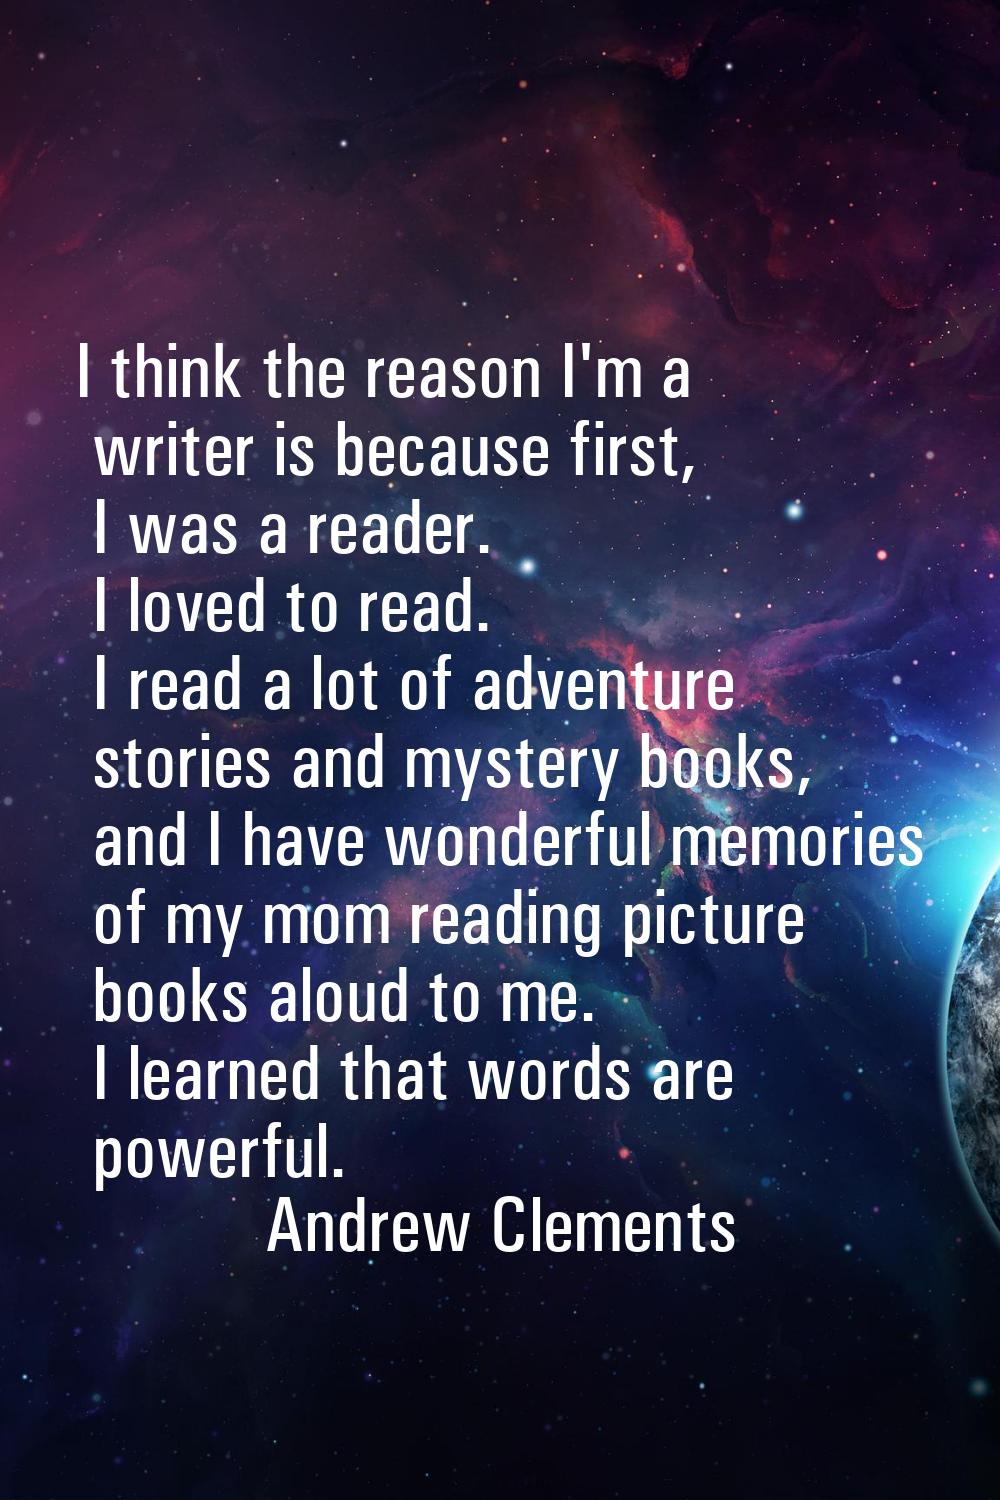 I think the reason I'm a writer is because first, I was a reader. I loved to read. I read a lot of 